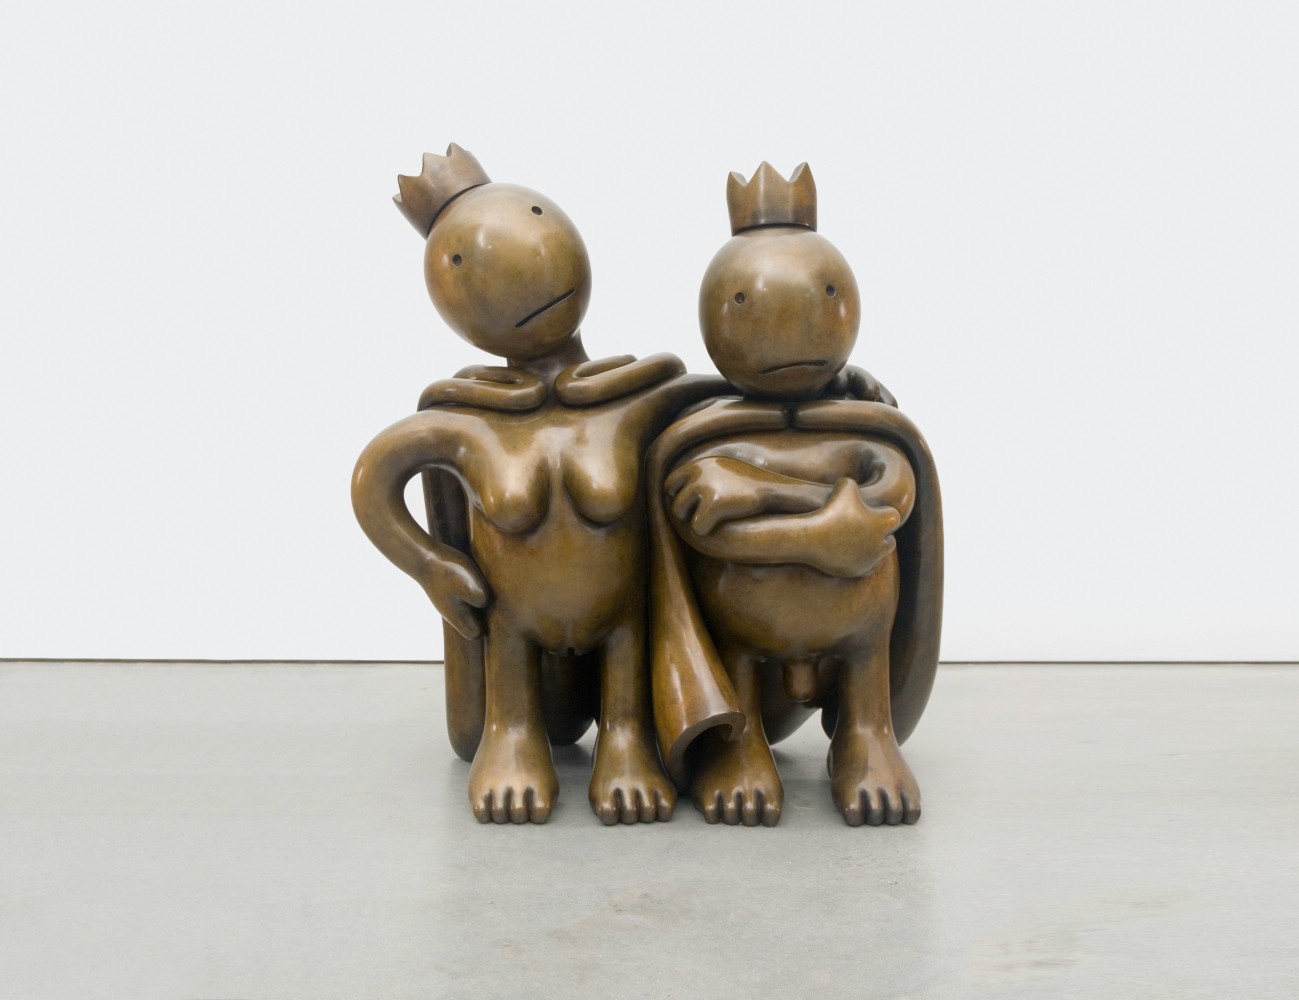 Two nude bronze figures with capes and crowns by Tom Otterness.